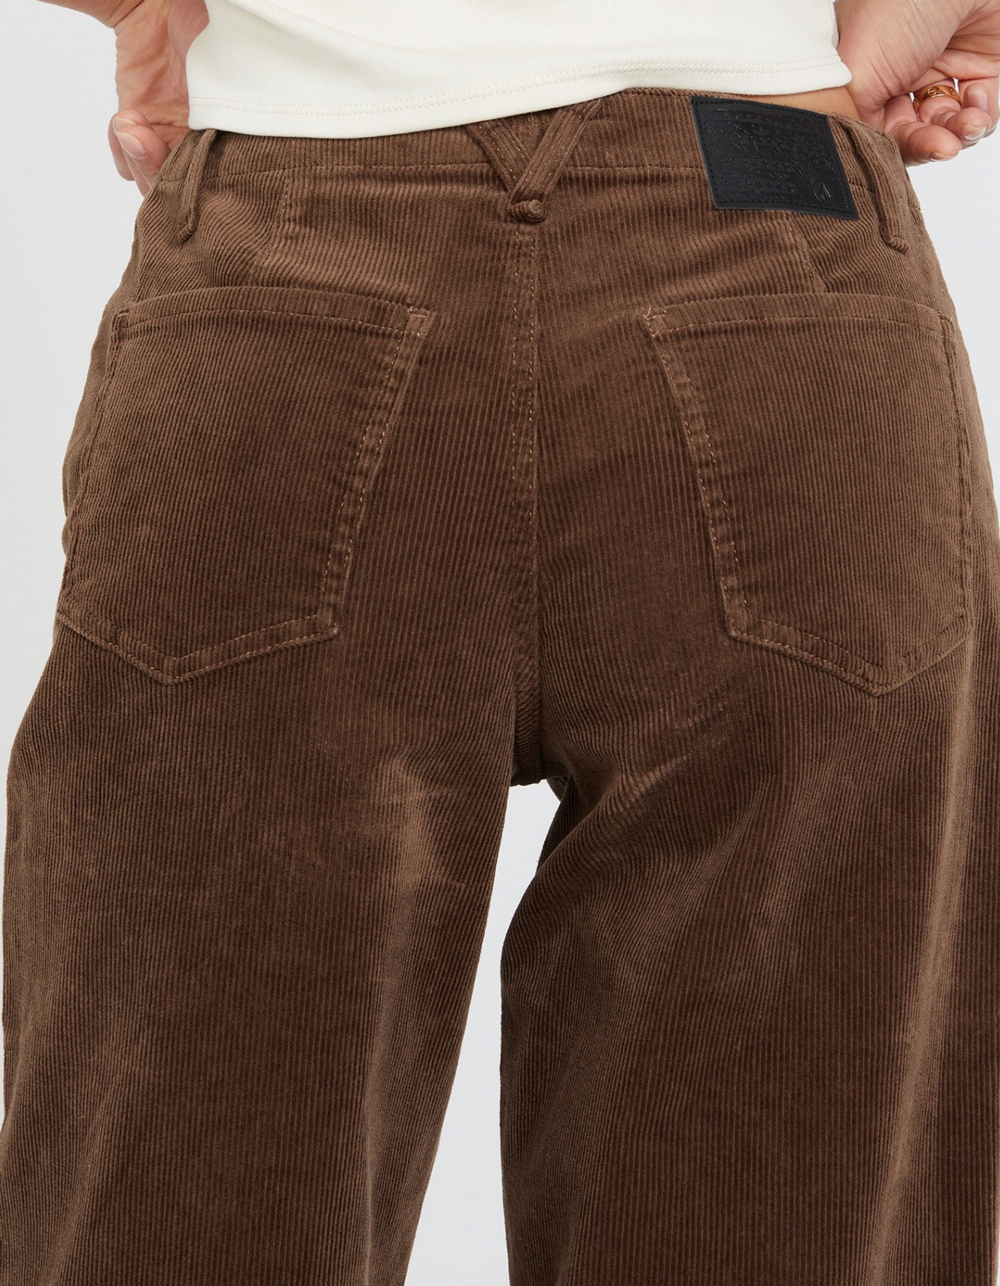 VOLCOM 1991 Stoned Womens Low Rise Corduroy Pants - BROWN | Tillys